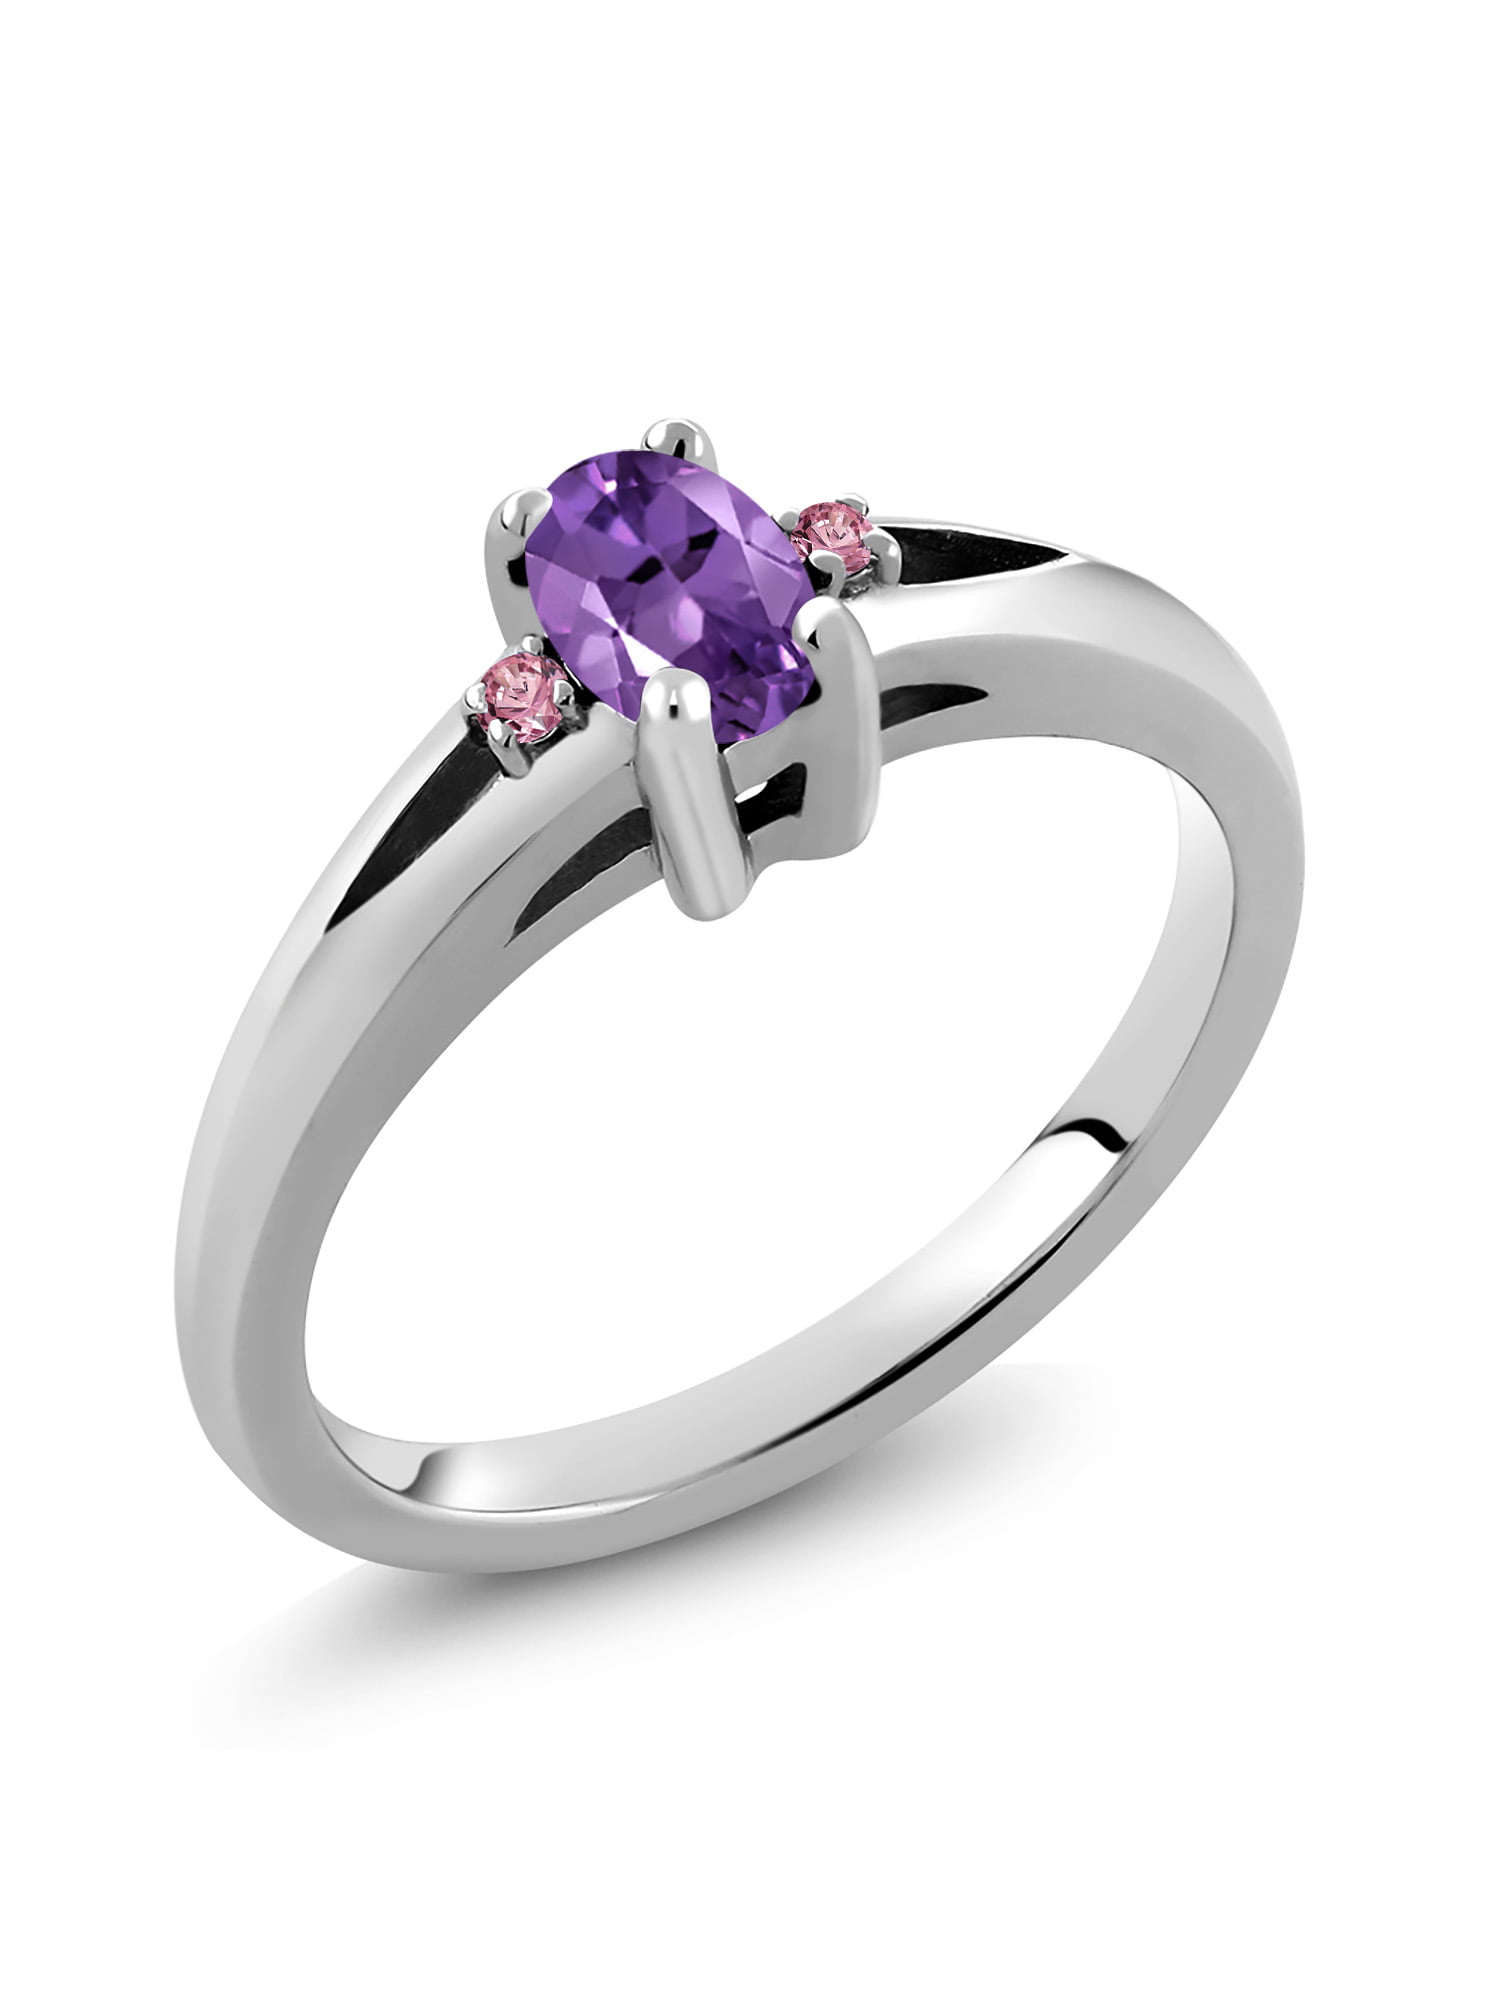 1.42 Ct Oval Checkerboard Purple Amethyst 925 Sterling Silver Ring 